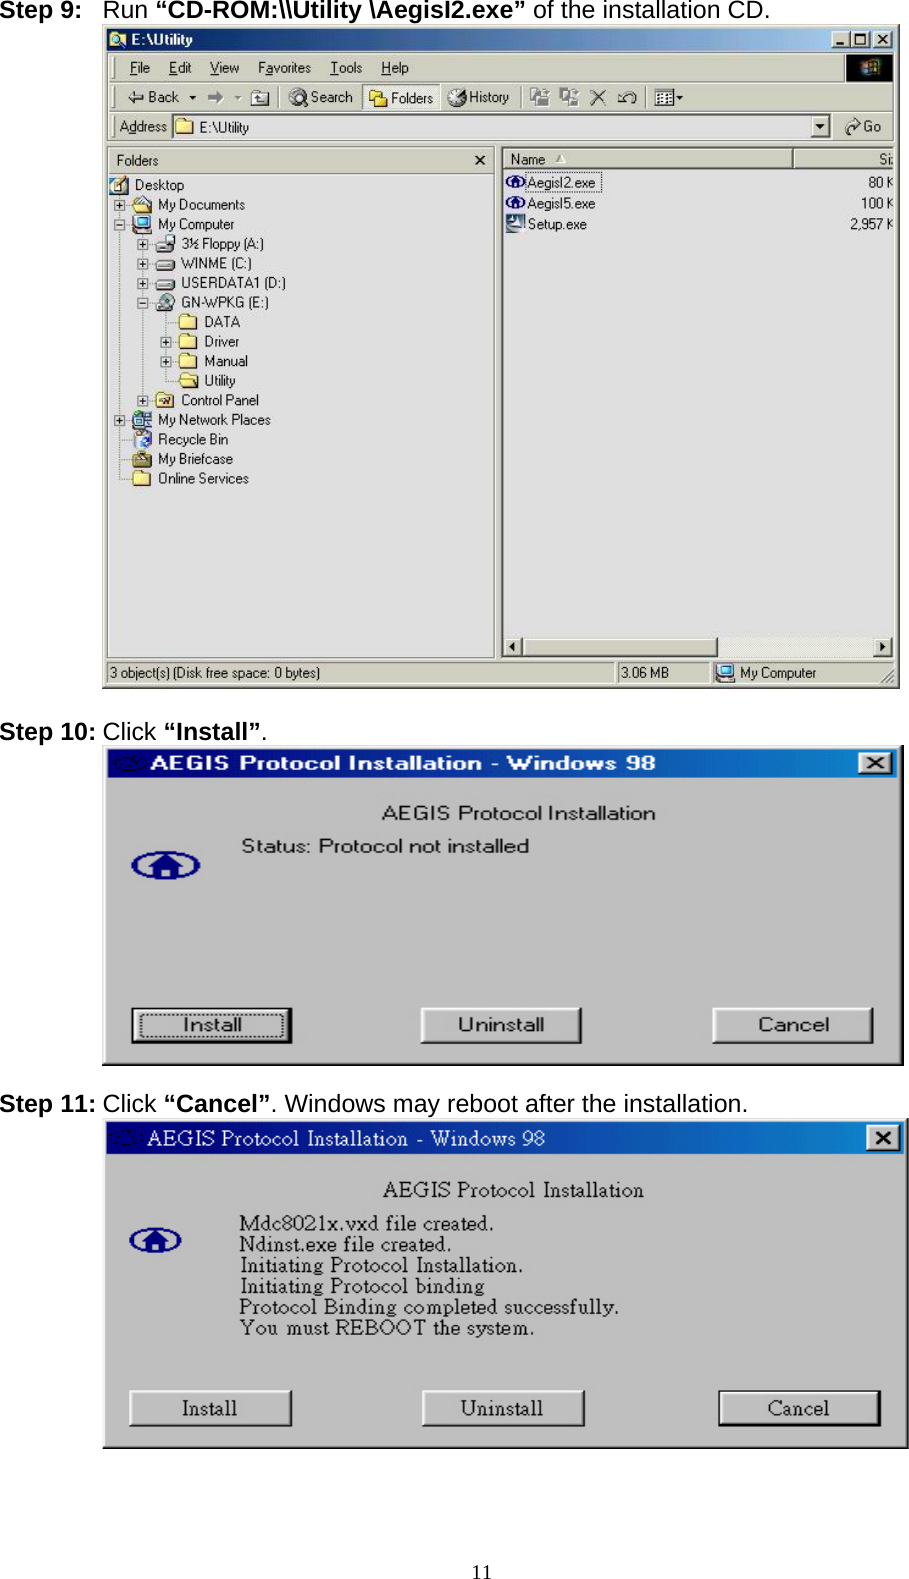 11   Step 9: Run “CD-ROM:\\Utility \AegisI2.exe” of the installation CD.   Step 10: Click “Install”.   Step 11: Click “Cancel”. Windows may reboot after the installation.   